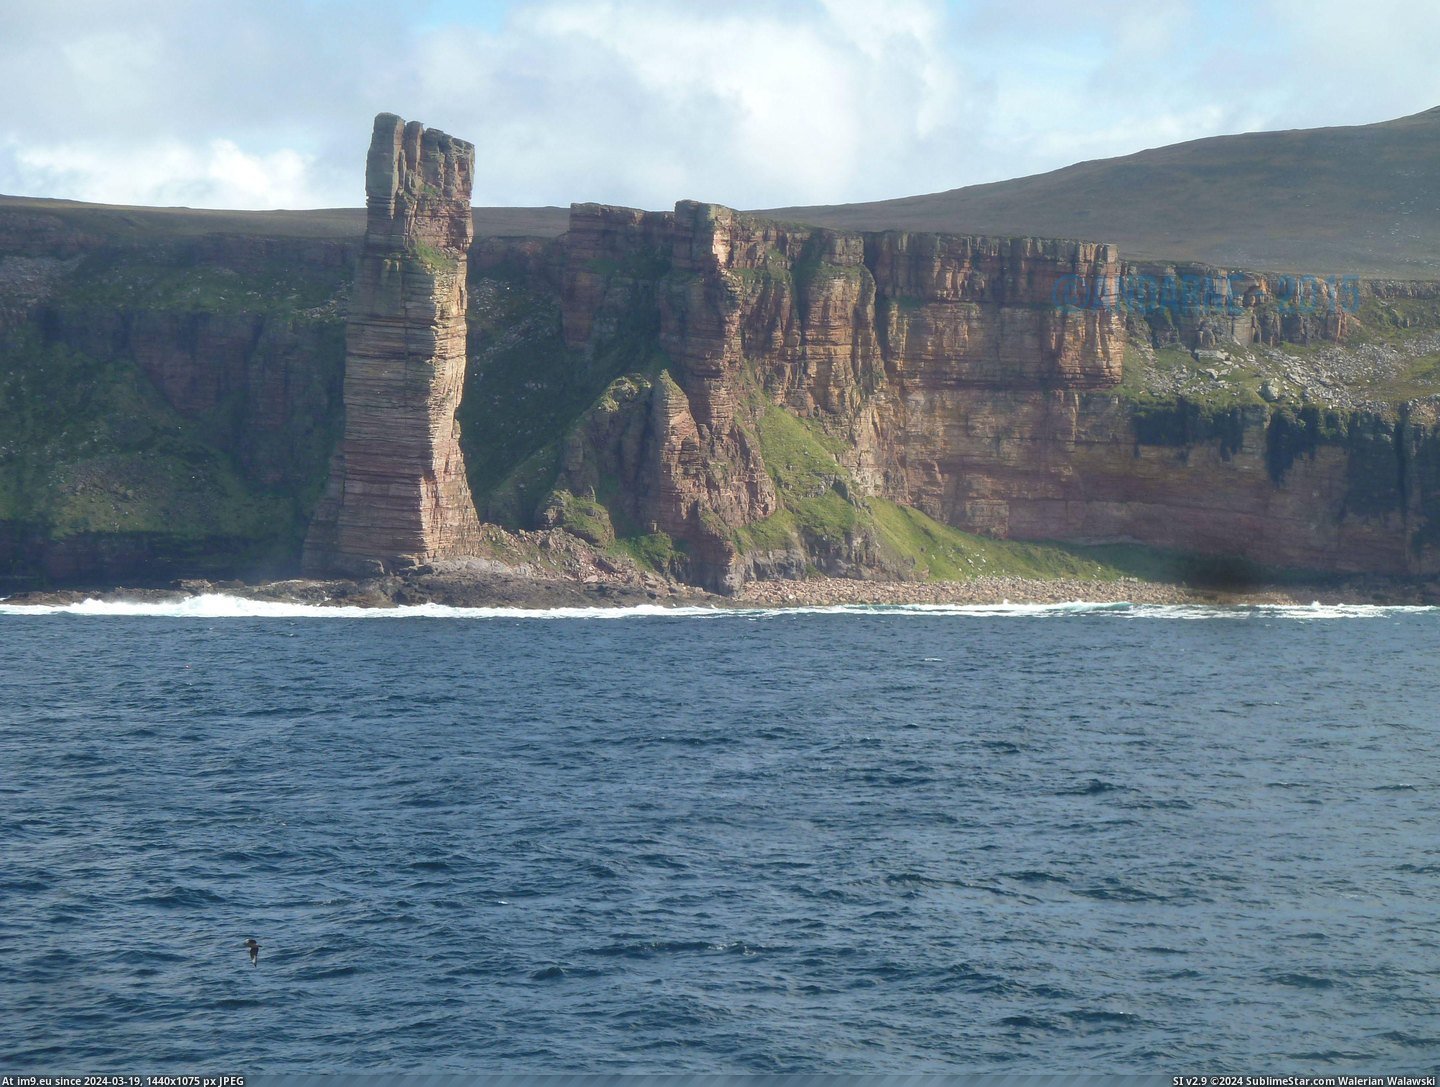 #Old #Flow #Man [Earthporn]  [3600x2700] The Old Man of Hoy, Scapa Flow - 2013 Pic. (Image of album My r/EARTHPORN favs))